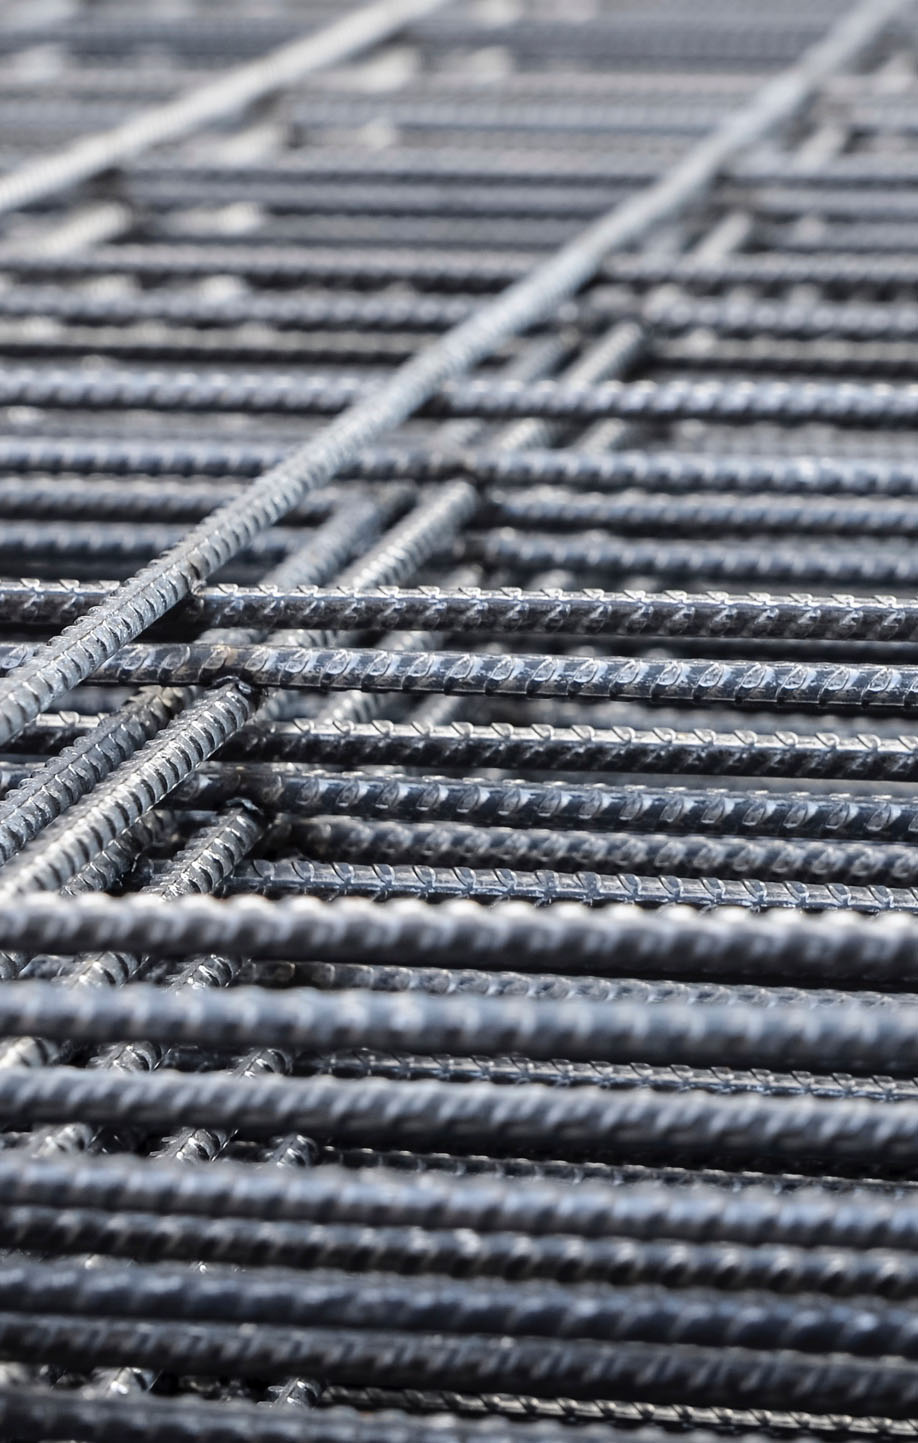 rebar used for concrete pads